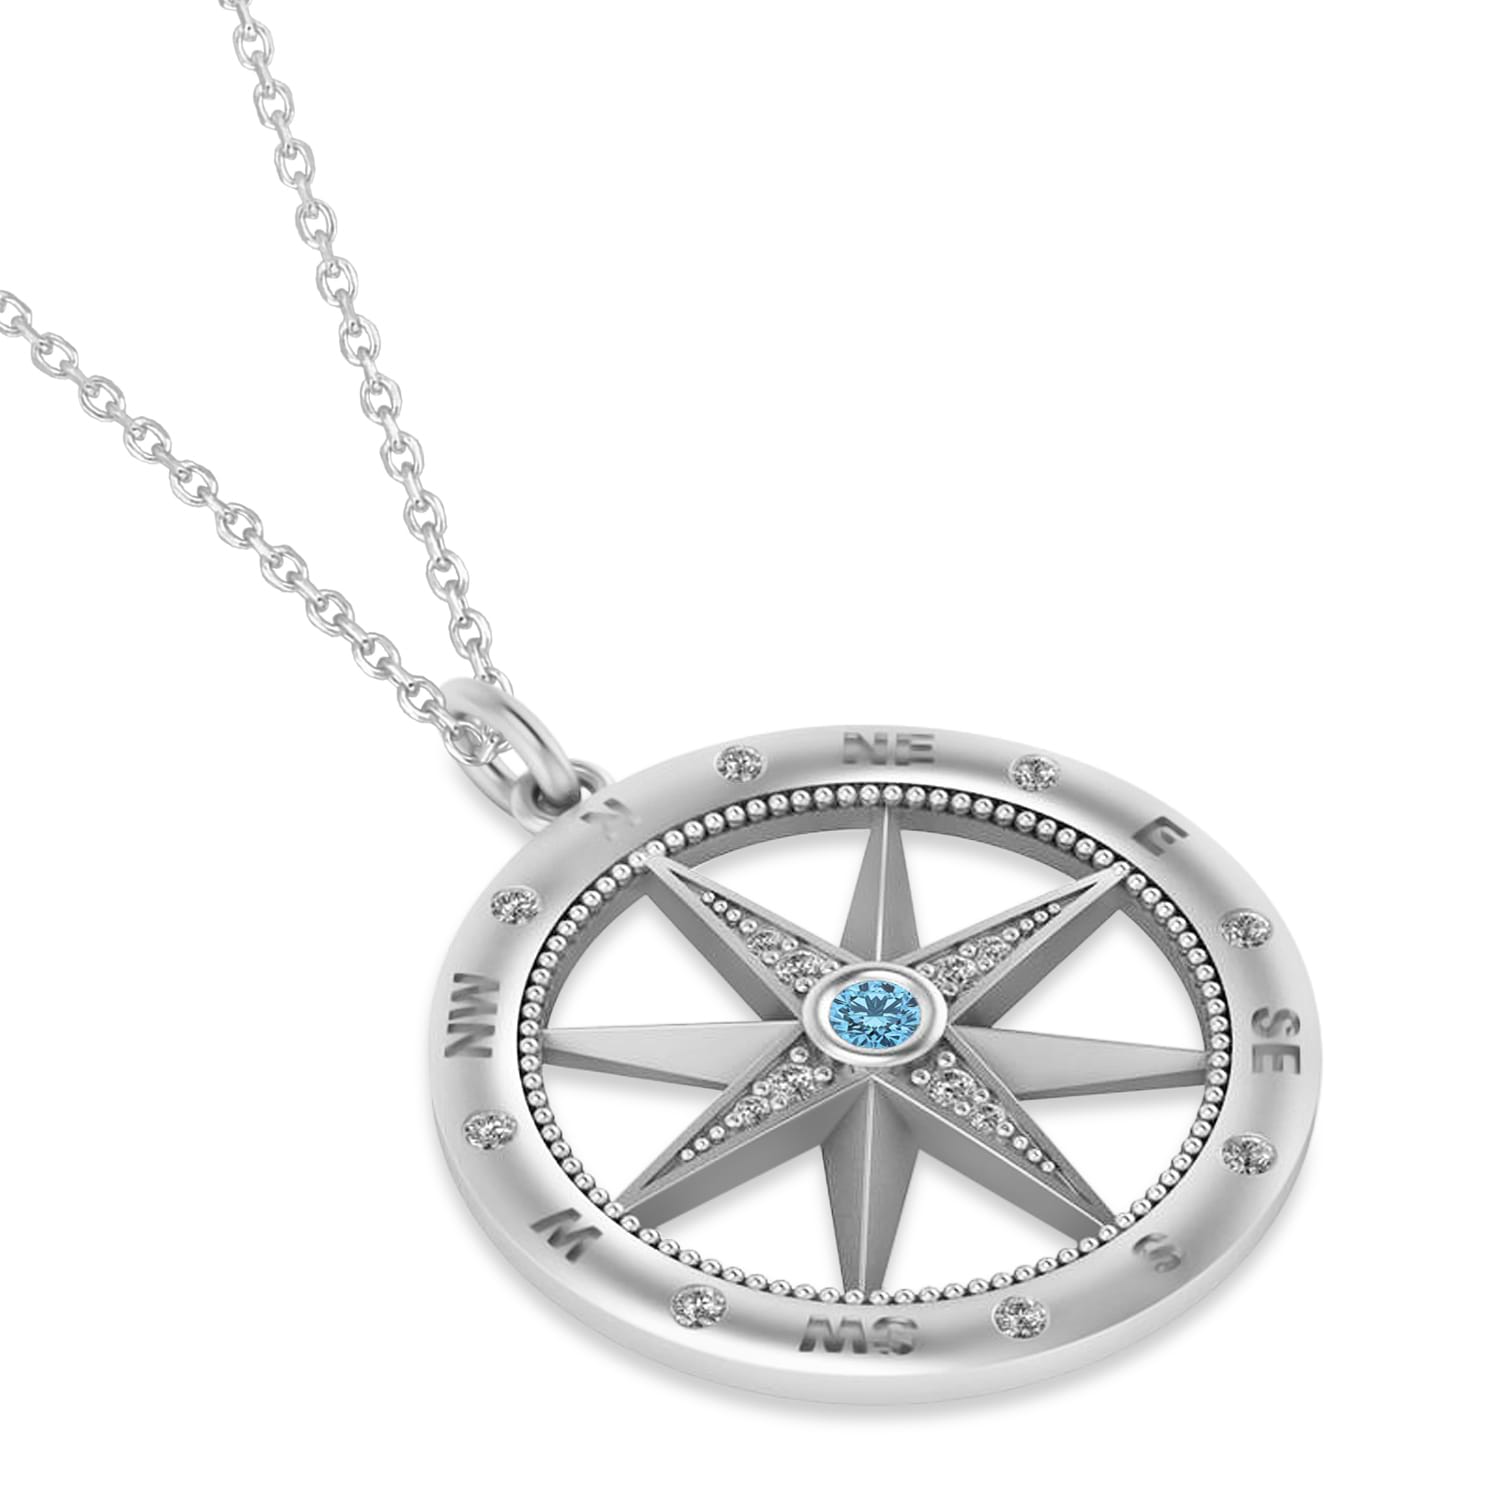 Large Compass Pendant For Men Blue Topaz & Diamond Accented 14k White Gold (0.38ct)